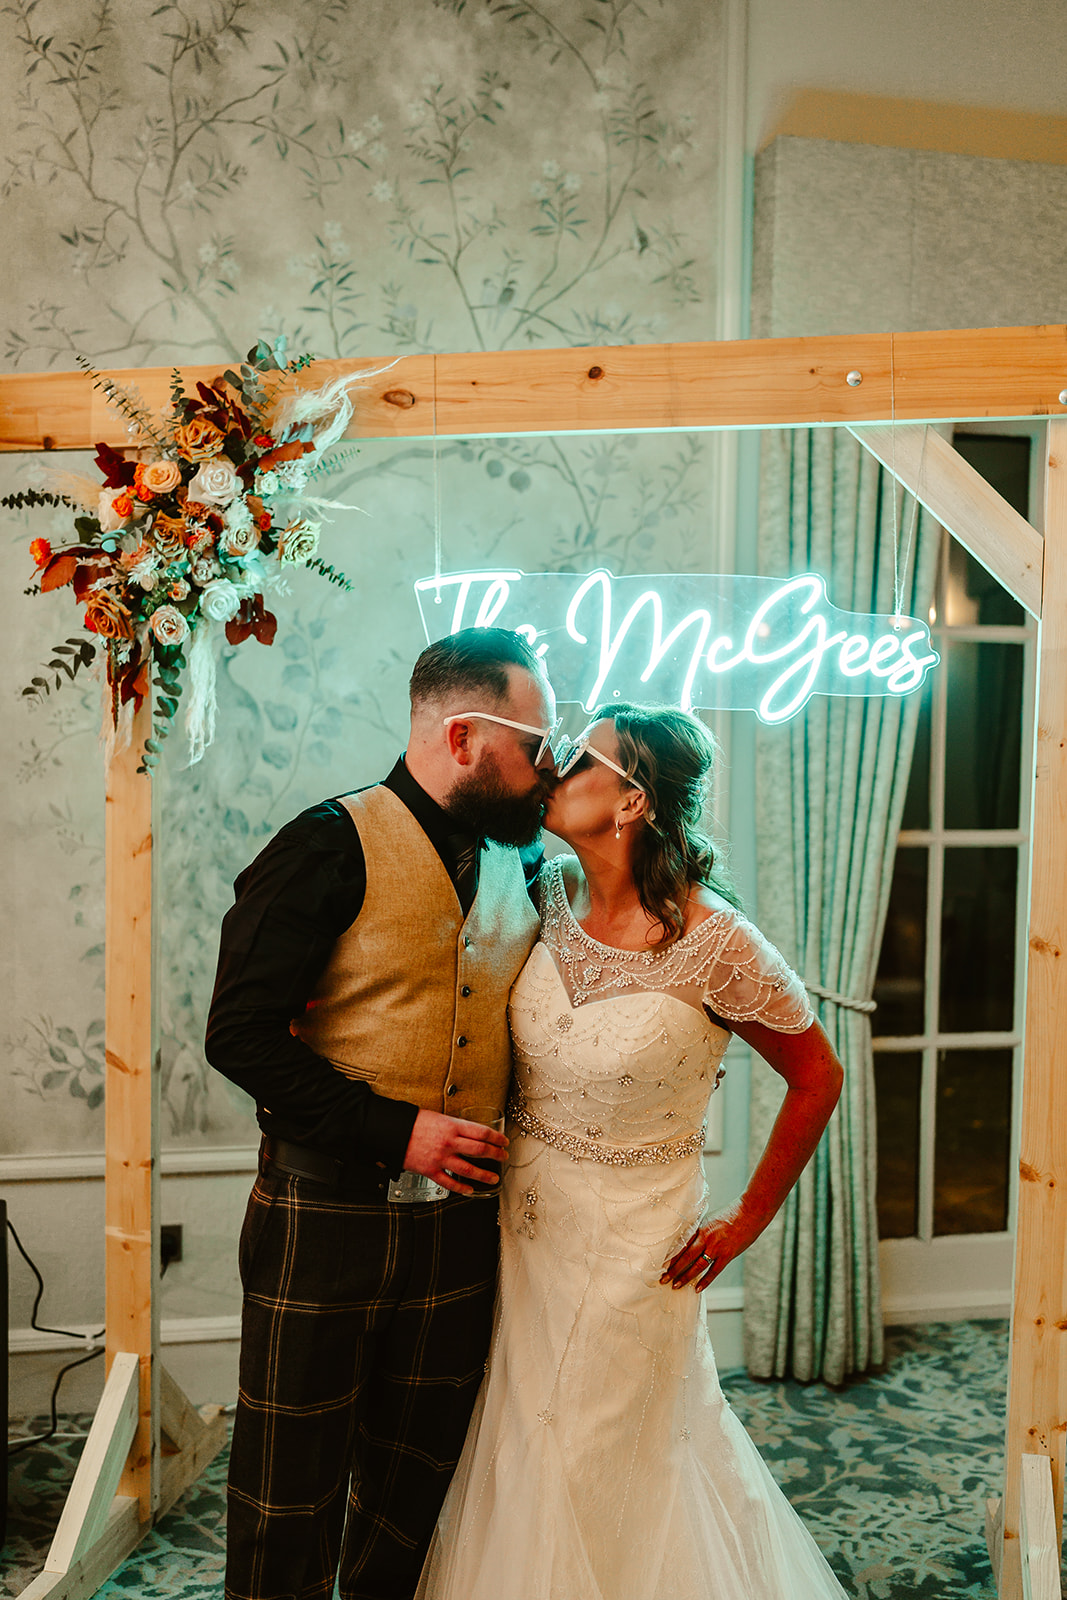 bride and groom kiss wearing sunglasses with a bespoke neon sign behind them